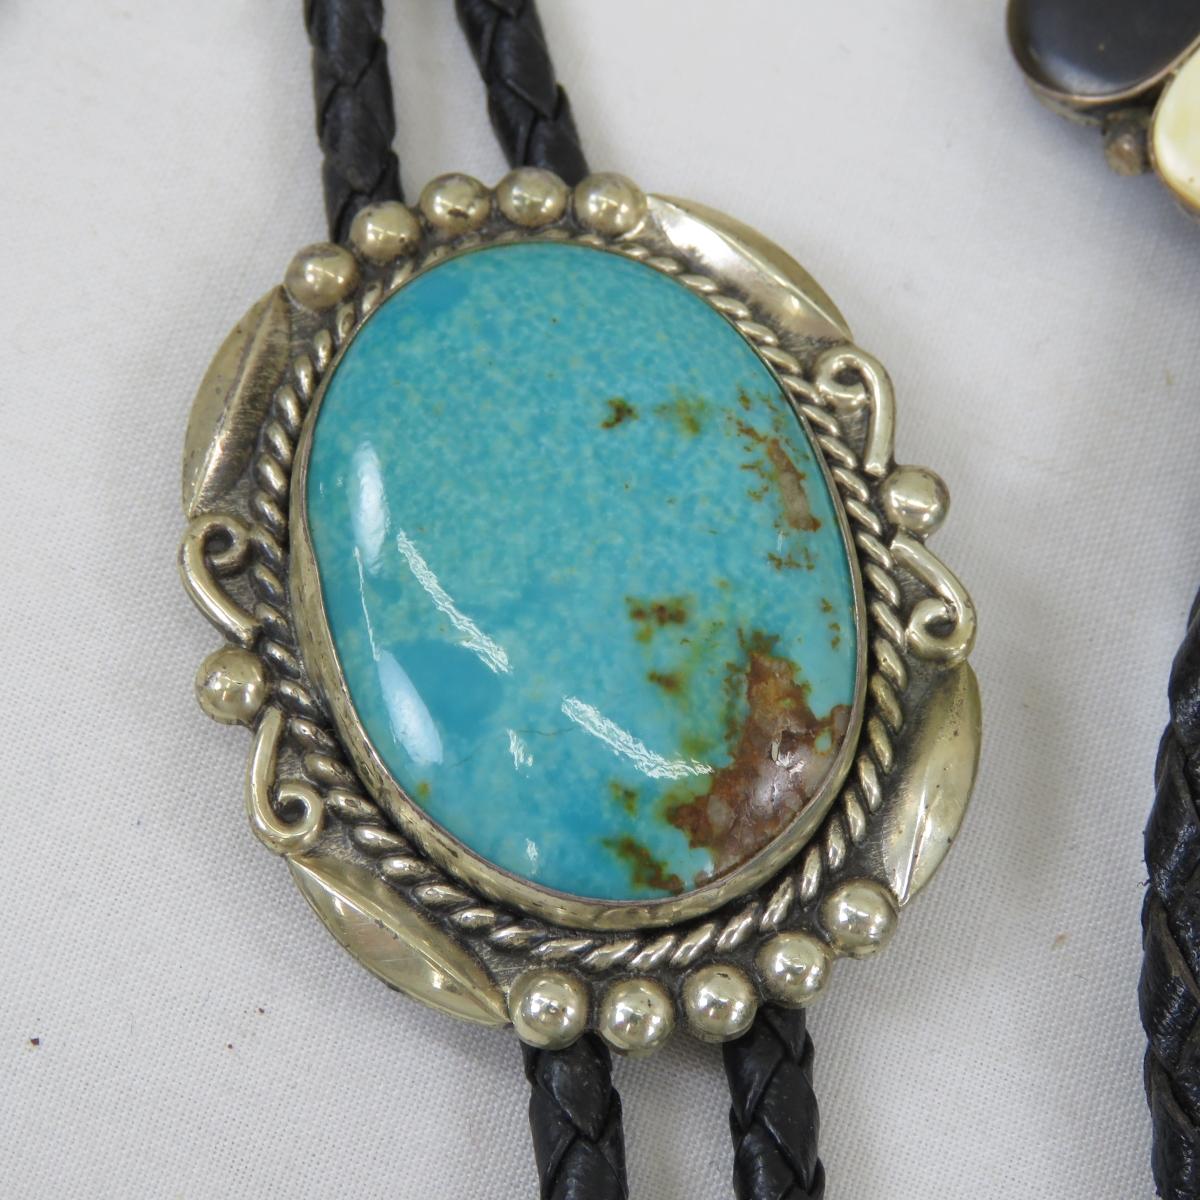 3 Bolo Ties- 1 Turquoise Bell Sterling